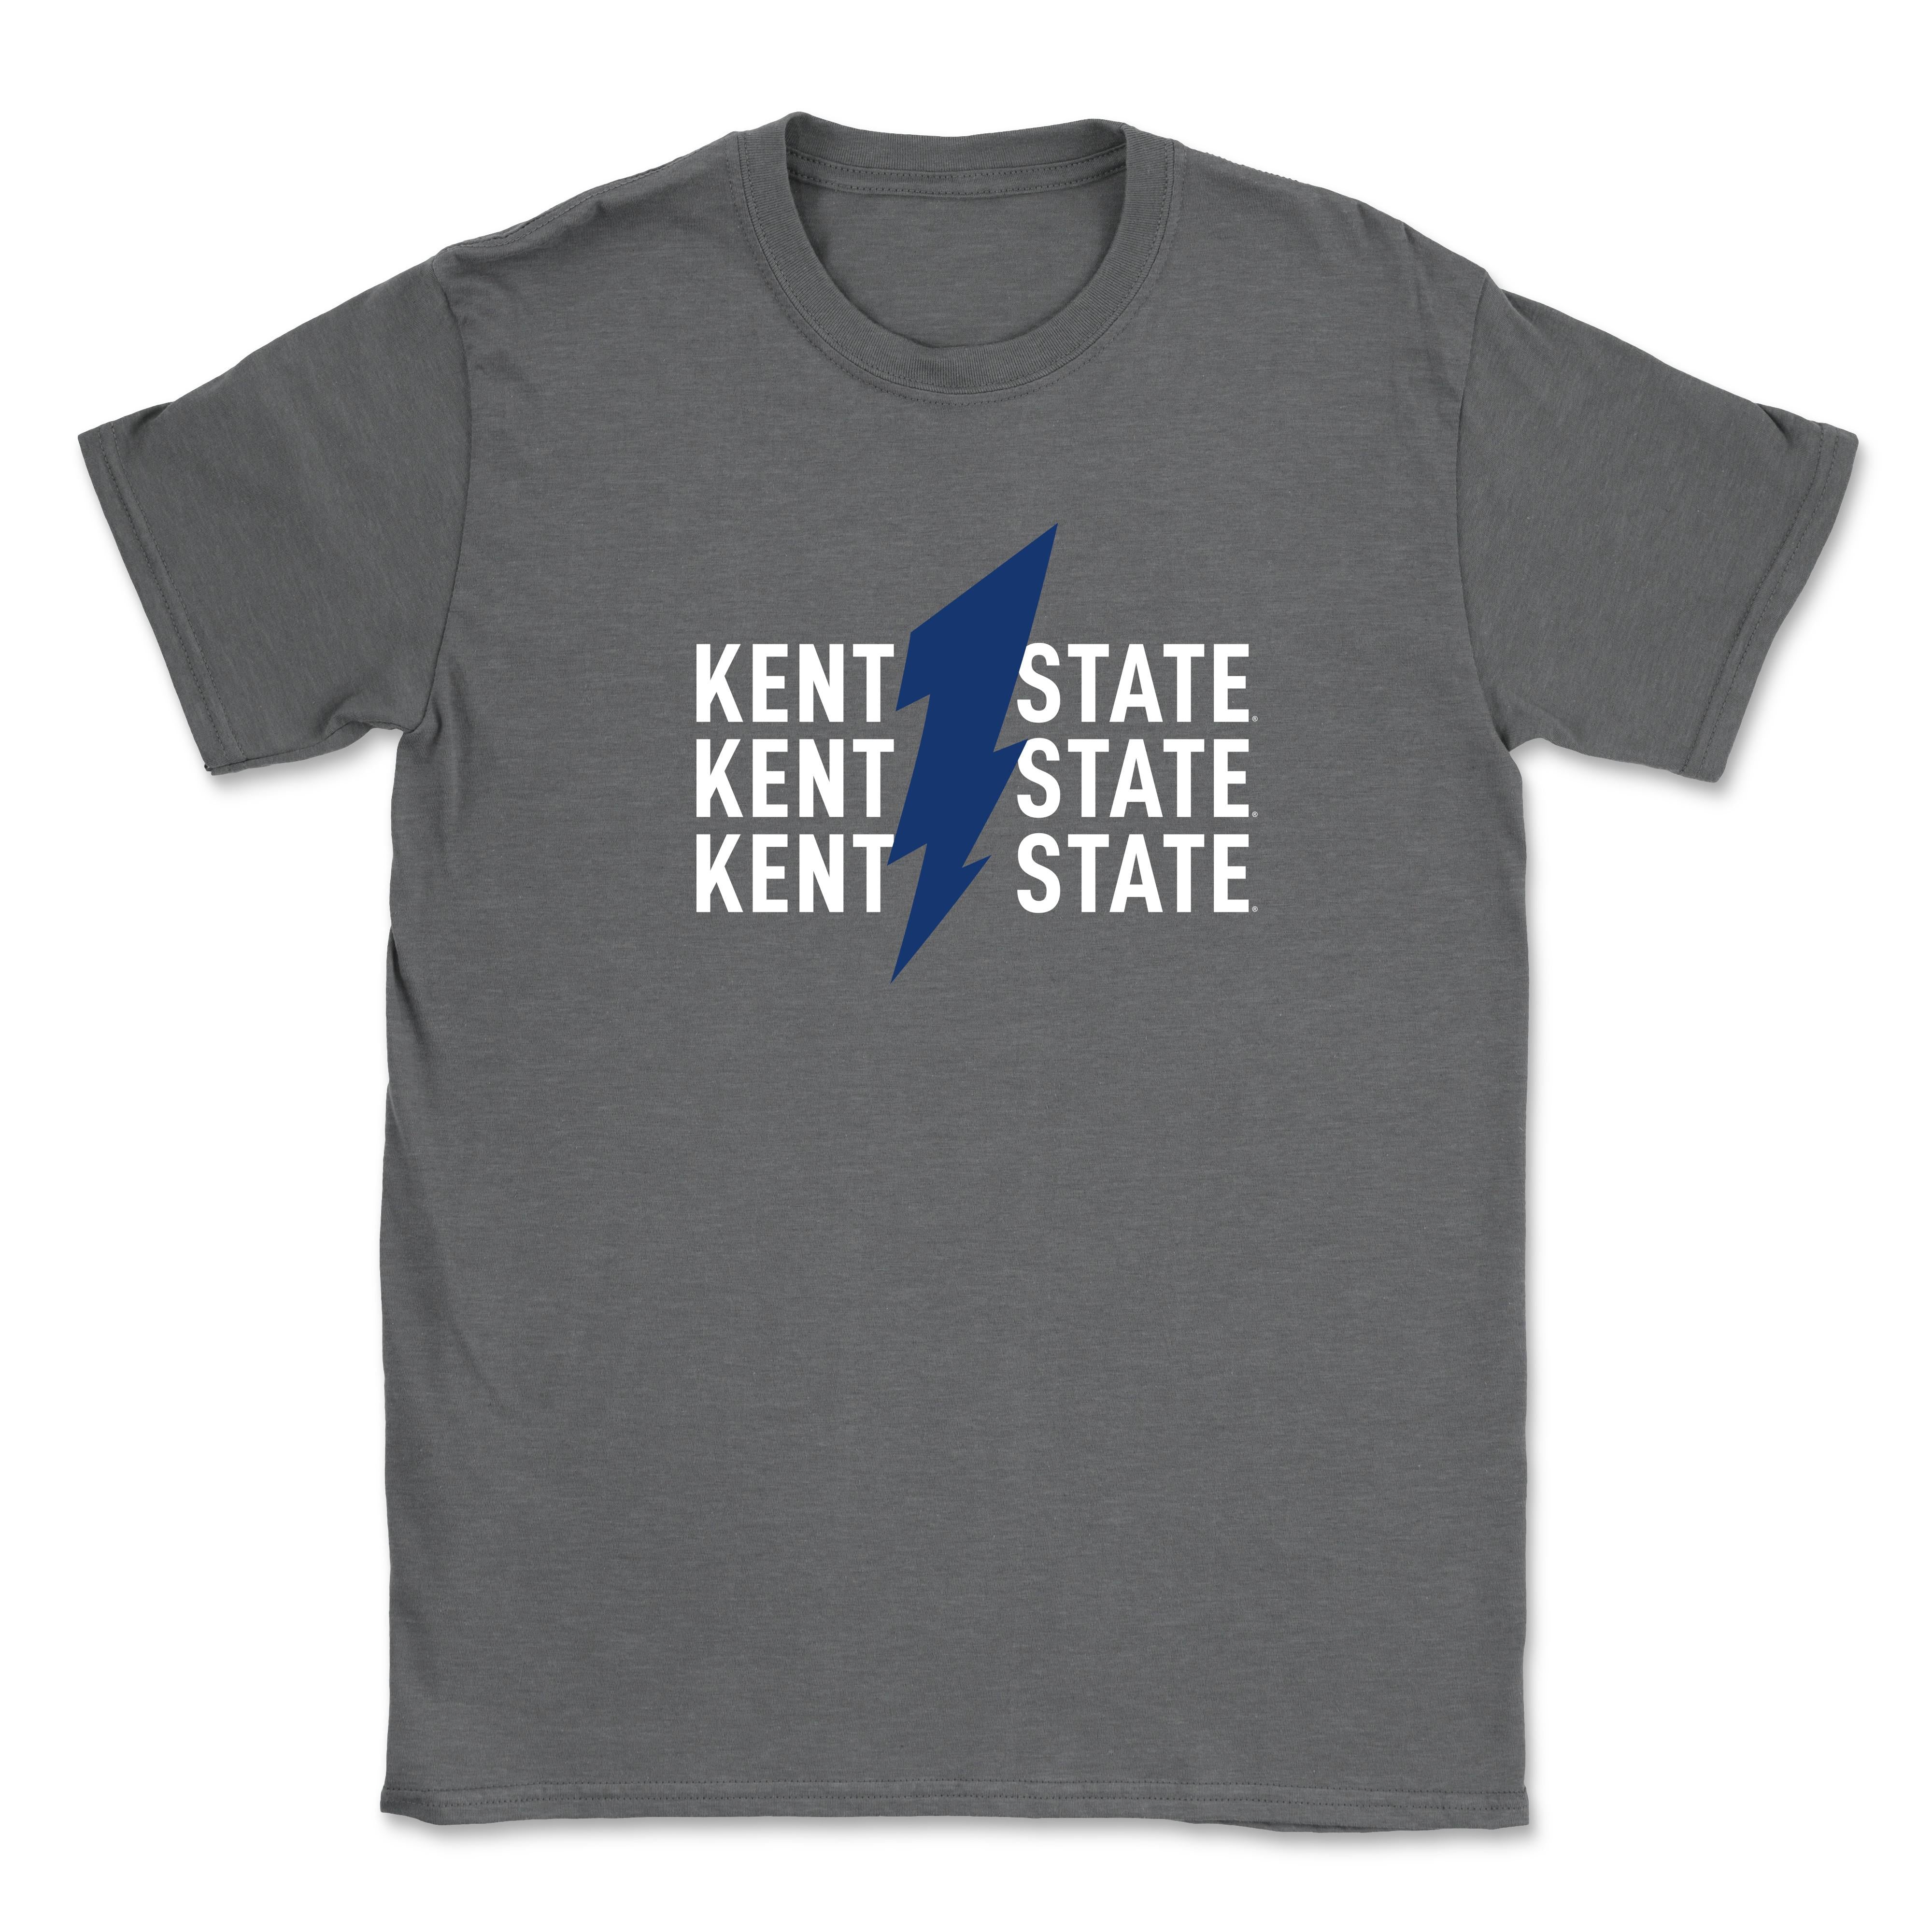 Repeating Kent State With Bolt